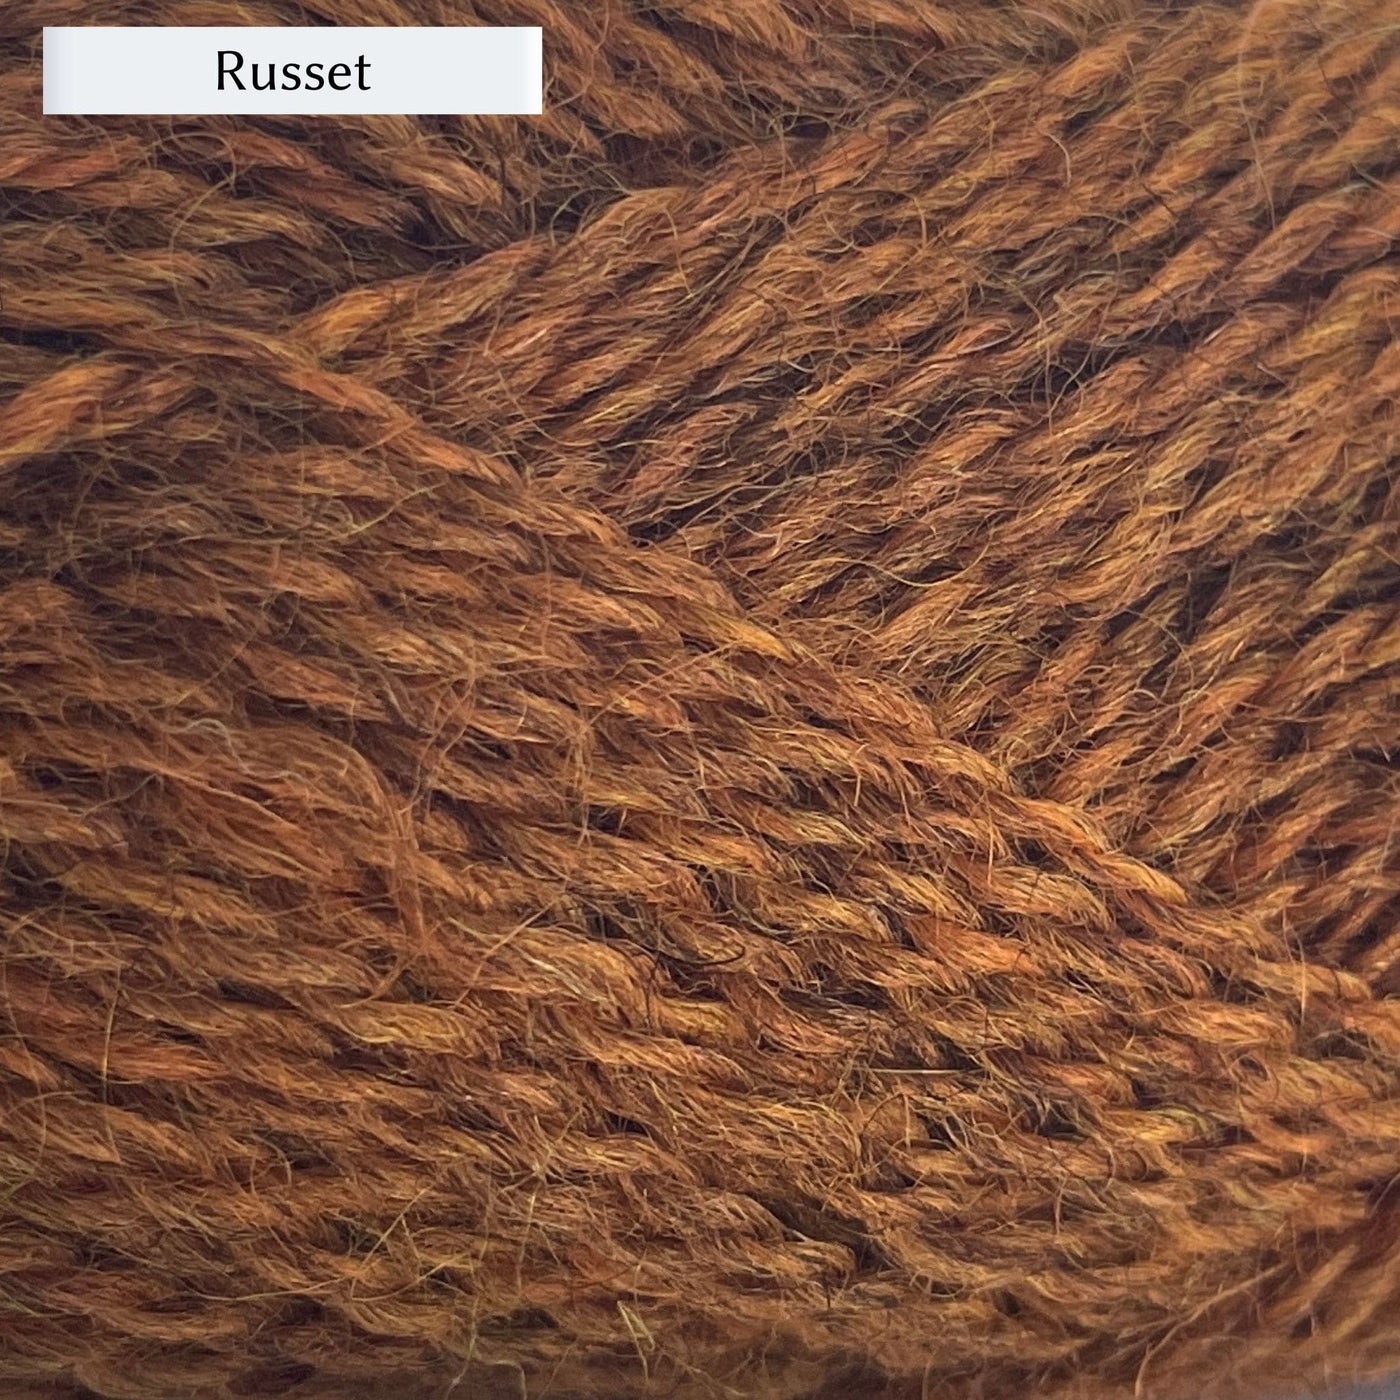 Marie Wallin's British Breeds yarn, a fingering weight, in color Russet, a warm deep brown